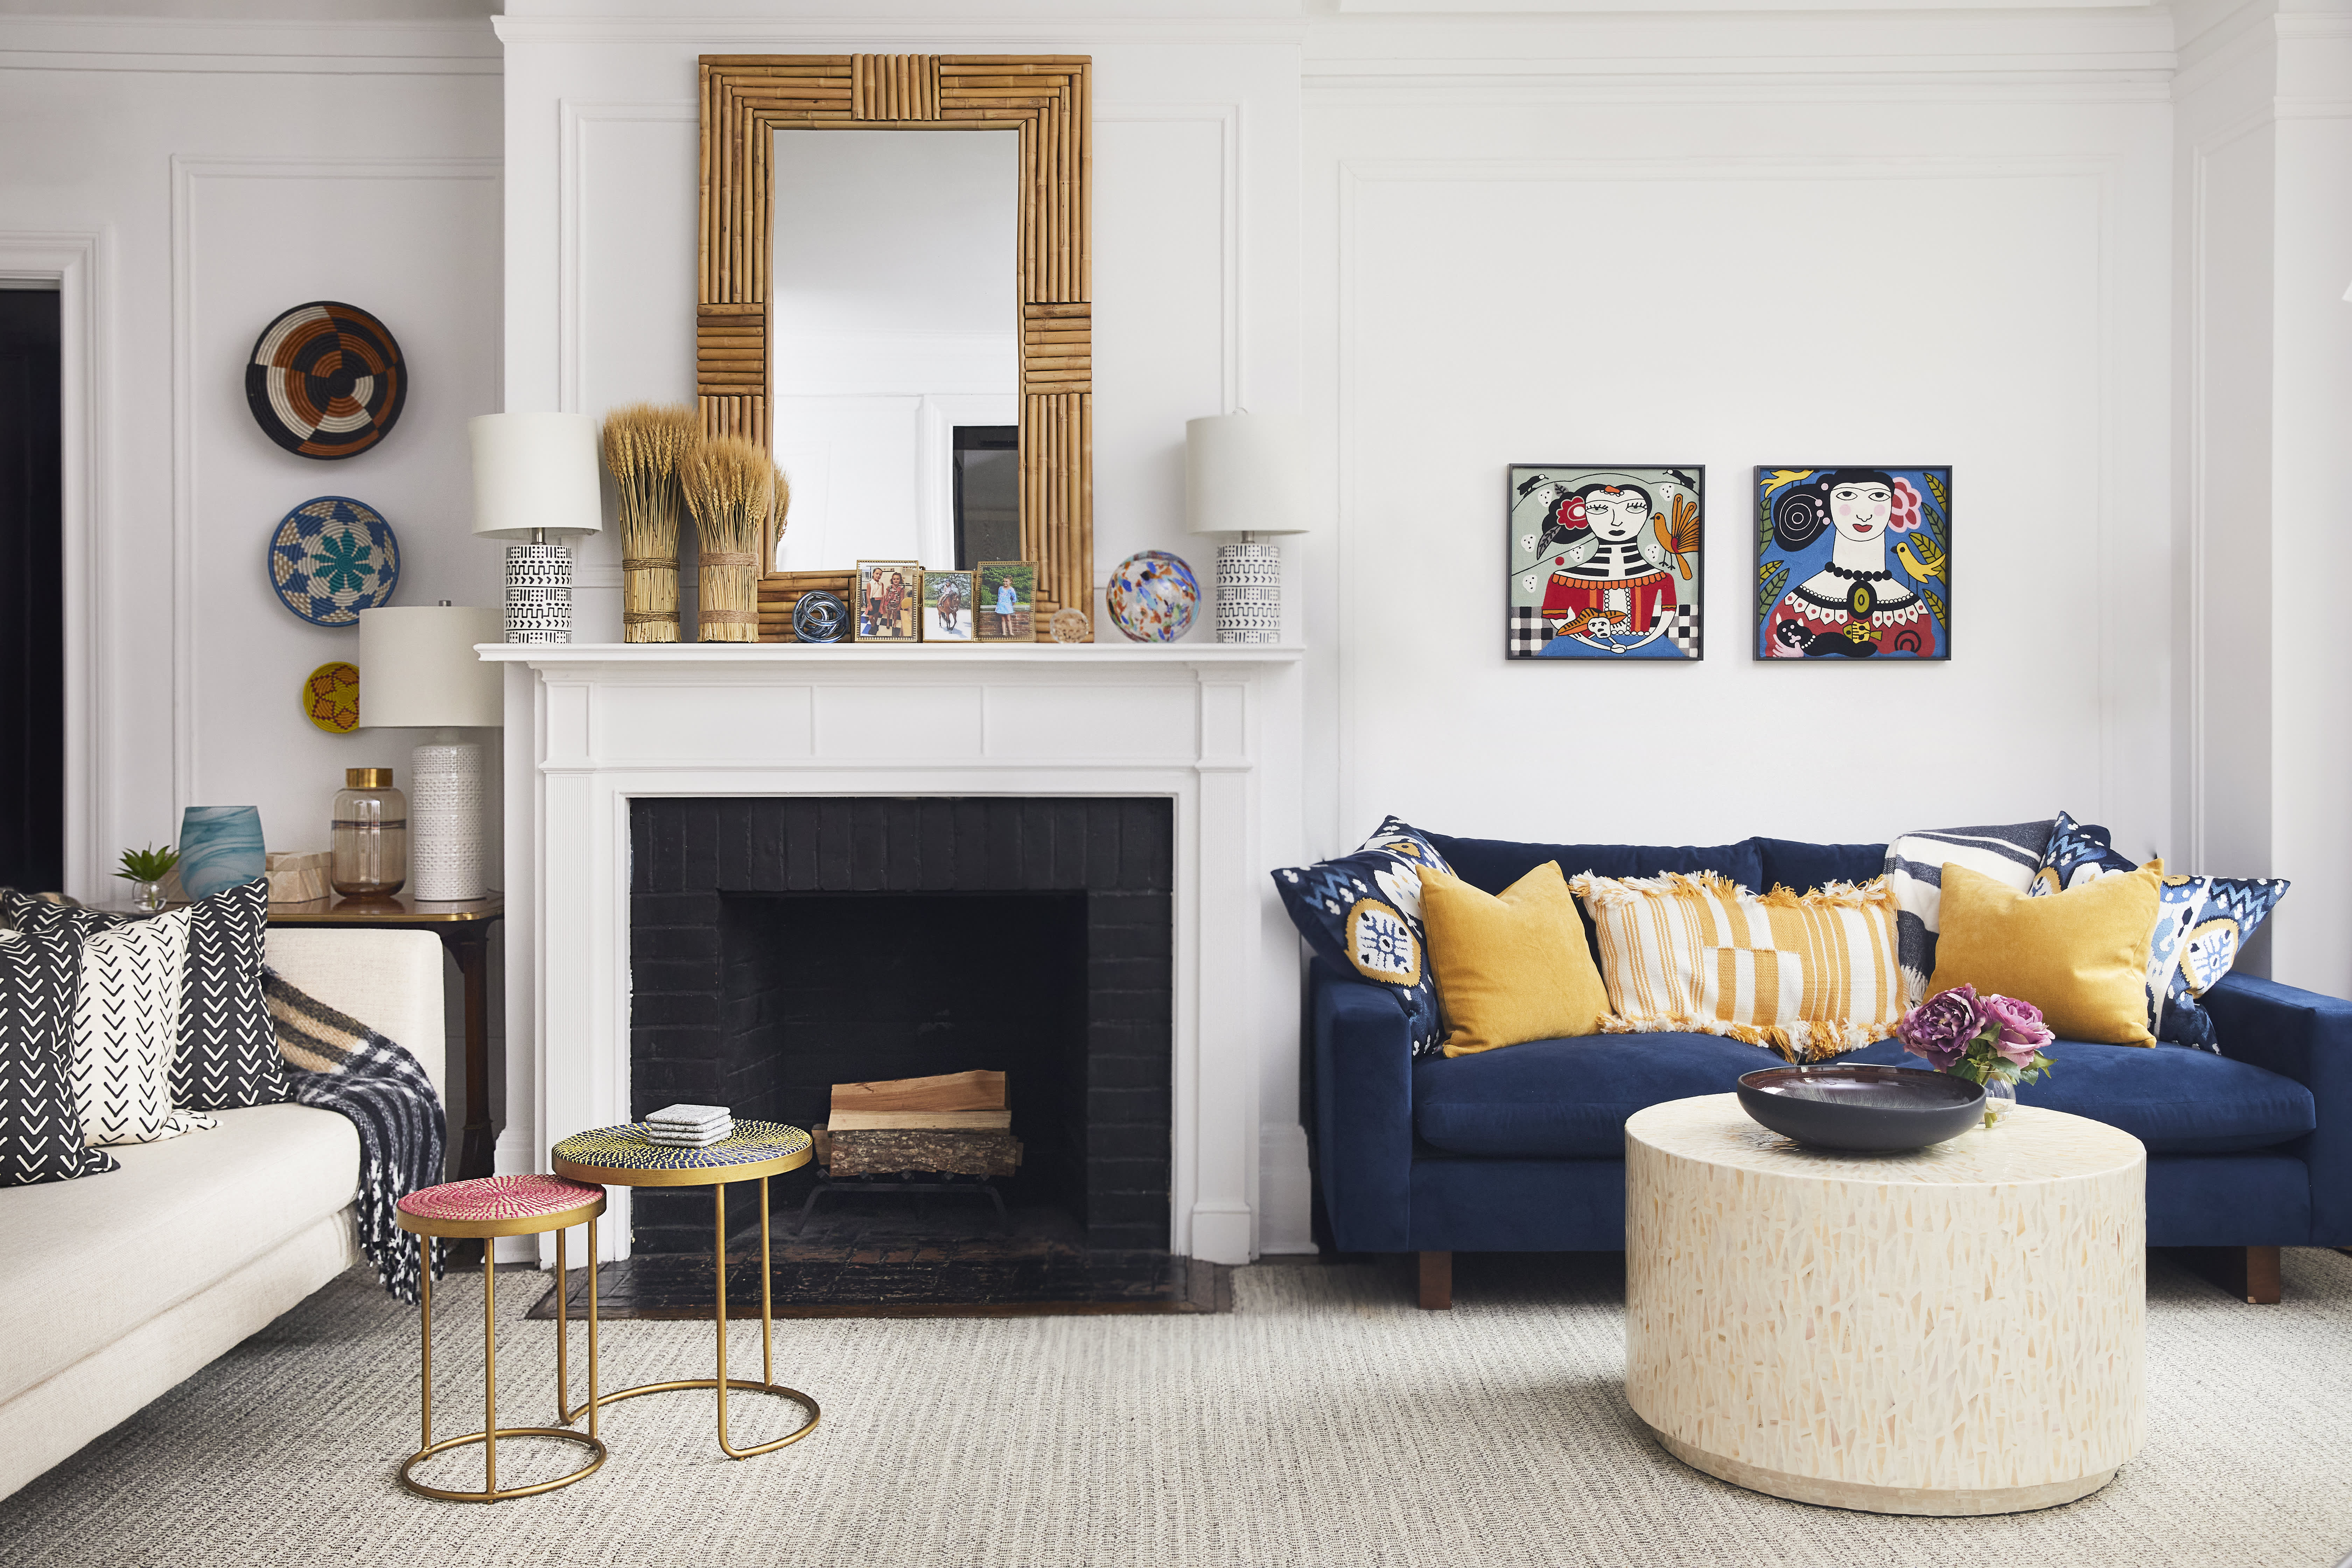 15 Best Living Room Design Ideas We Saw This Year